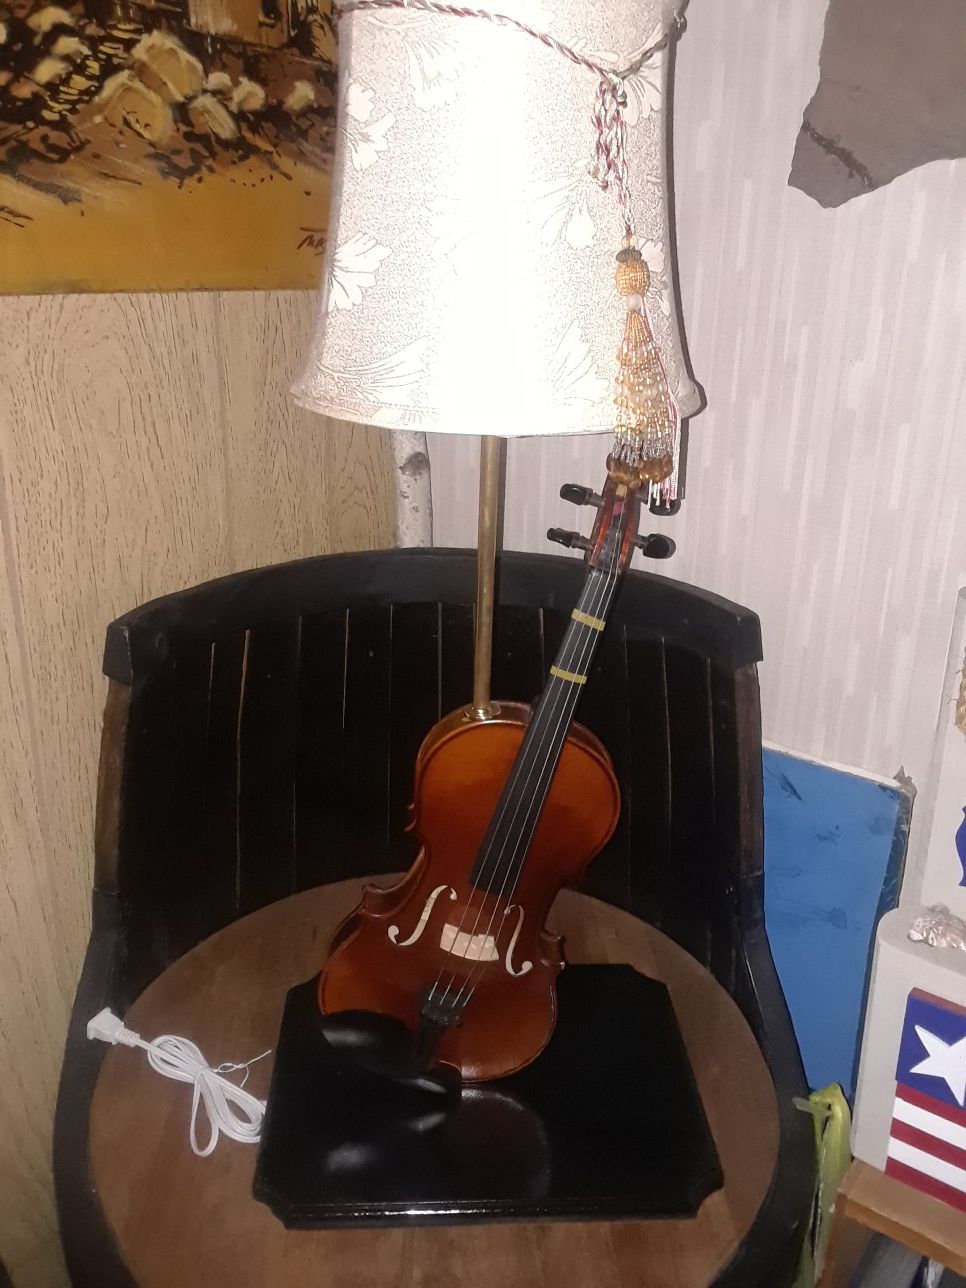 Hand crafted Violin lamp